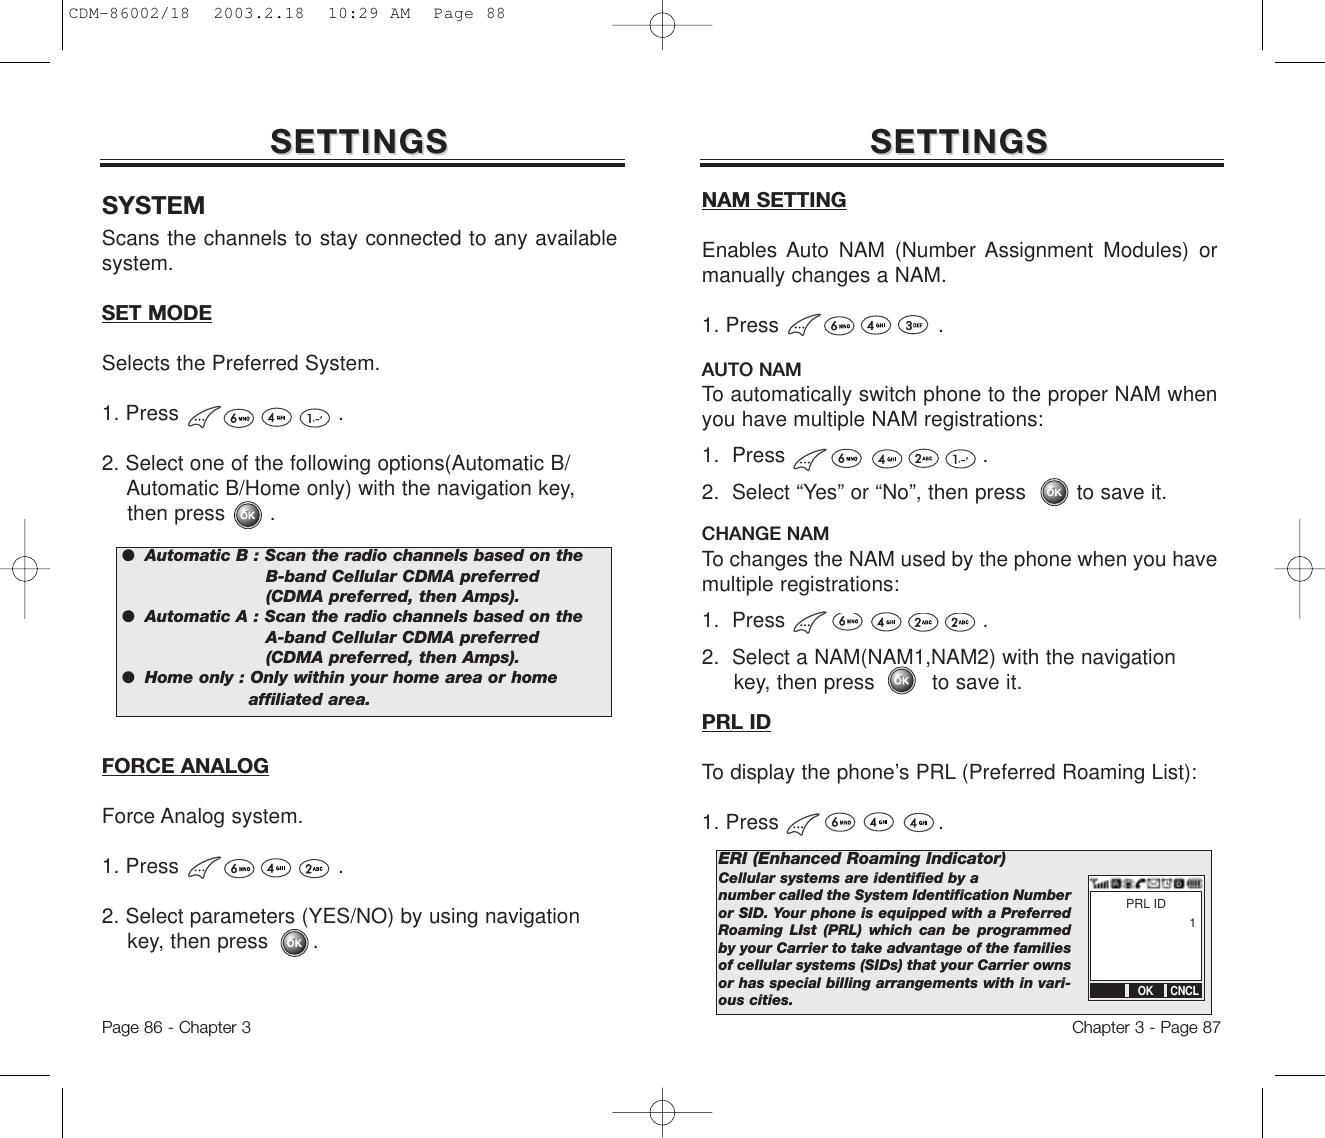 Chapter 3 - Page 87Page 86 - Chapter 3Scans the channels to stay connected to any availablesystem.SET MODESelects the Preferred System. 1. Press                         .2. Select one of the following options(Automatic B/Automatic B/Home only) with the navigation key, then press       .SETTINGSSETTINGS SETTINGSSETTINGS●  Automatic B : Scan the radio channels based on theB-band Cellular CDMA preferred (CDMA preferred, then Amps).●  Automatic A : Scan the radio channels based on theA-band Cellular CDMA preferred (CDMA preferred, then Amps).●  Home only : Only within your home area or homeaffiliated area.SYSTEMFORCE ANALOGForce Analog system.1. Press                         .2. Select parameters (YES/NO) by using navigation key, then press       .AUTO NAMTo automatically switch phone to the proper NAM whenyou have multiple NAM registrations:1.  Press .2.  Select “Yes” or “No”, then press        to save it.CHANGE NAMTo changes the NAM used by the phone when you havemultiple registrations:1.  Press .2.  Select a NAM(NAM1,NAM2) with the navigation key, then press         to save it.NAM SETTINGEnables Auto NAM (Number Assignment Modules) ormanually changes a NAM.1. Press                         .PRL IDTo display the phone’s PRL (Preferred Roaming List):1. Press                         .ERI (Enhanced Roaming Indicator)Cellular systems are identified by a number called the System Identification Numberor SID. Your phone is equipped with a PreferredRoaming LIst (PRL) which can be programmedby your Carrier to take advantage of the familiesof cellular systems (SIDs) that your Carrier ownsor has special billing arrangements with in vari-ous cities.PRL ID1OK CNCLCDM-86002/18  2003.2.18  10:29 AM  Page 88